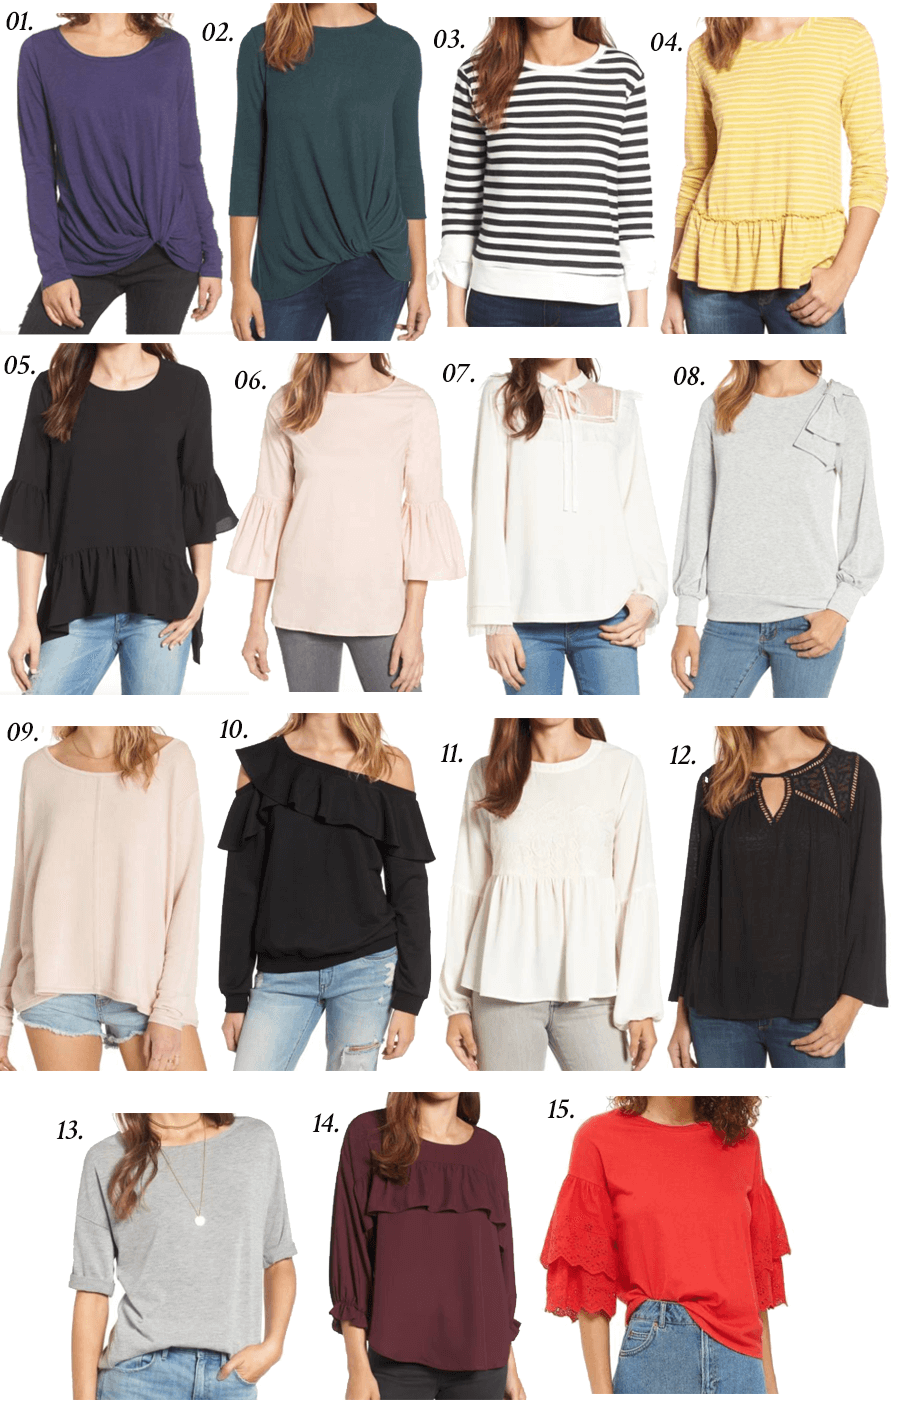 Under 50, Fall, Tops, Fall Style